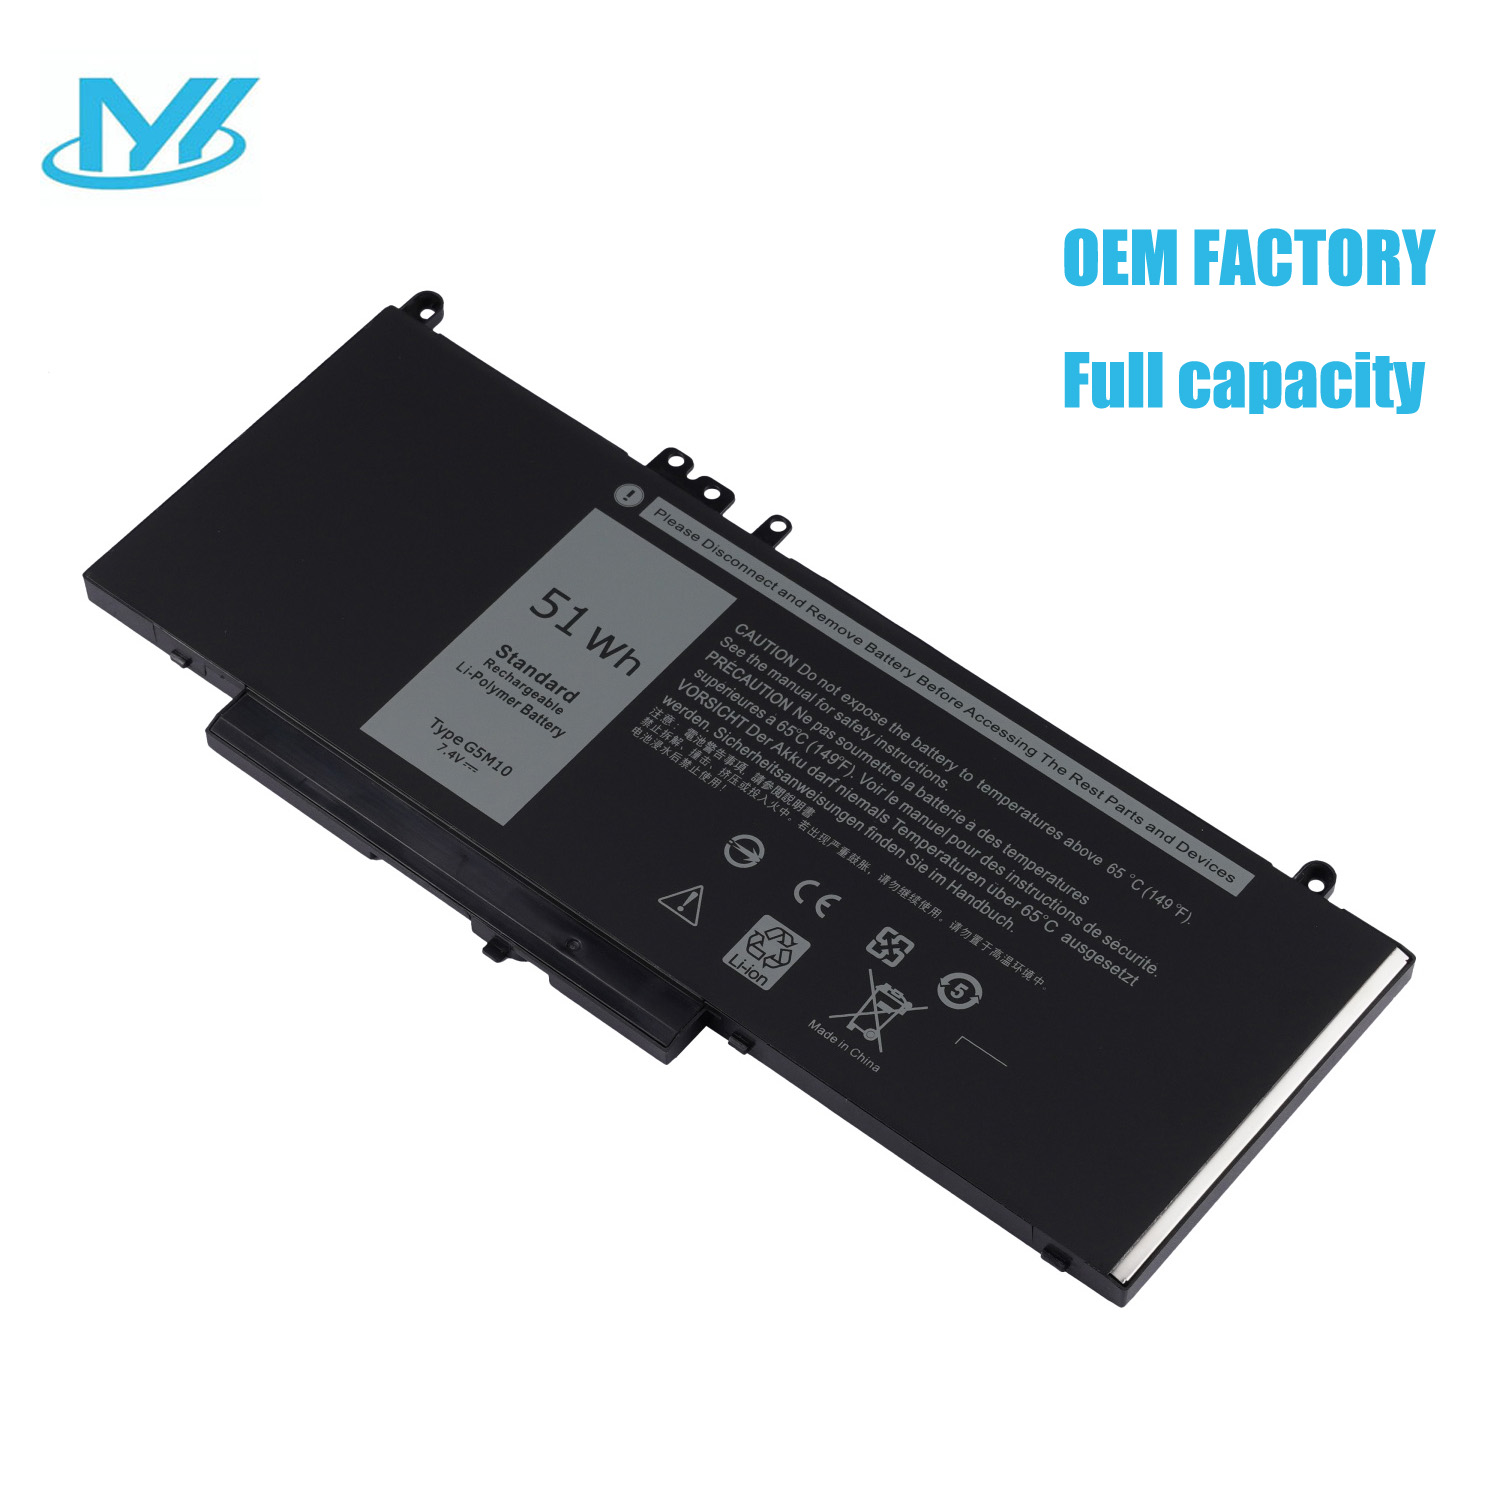 G5M10 Replacement Lithium ion battery Laptop Batteries 0WYJC2 8V5GX R9XM9 WYJC2 1KY05 14.8V 92Wh For Dell Latitude 3160 3350 E5450 Laptop